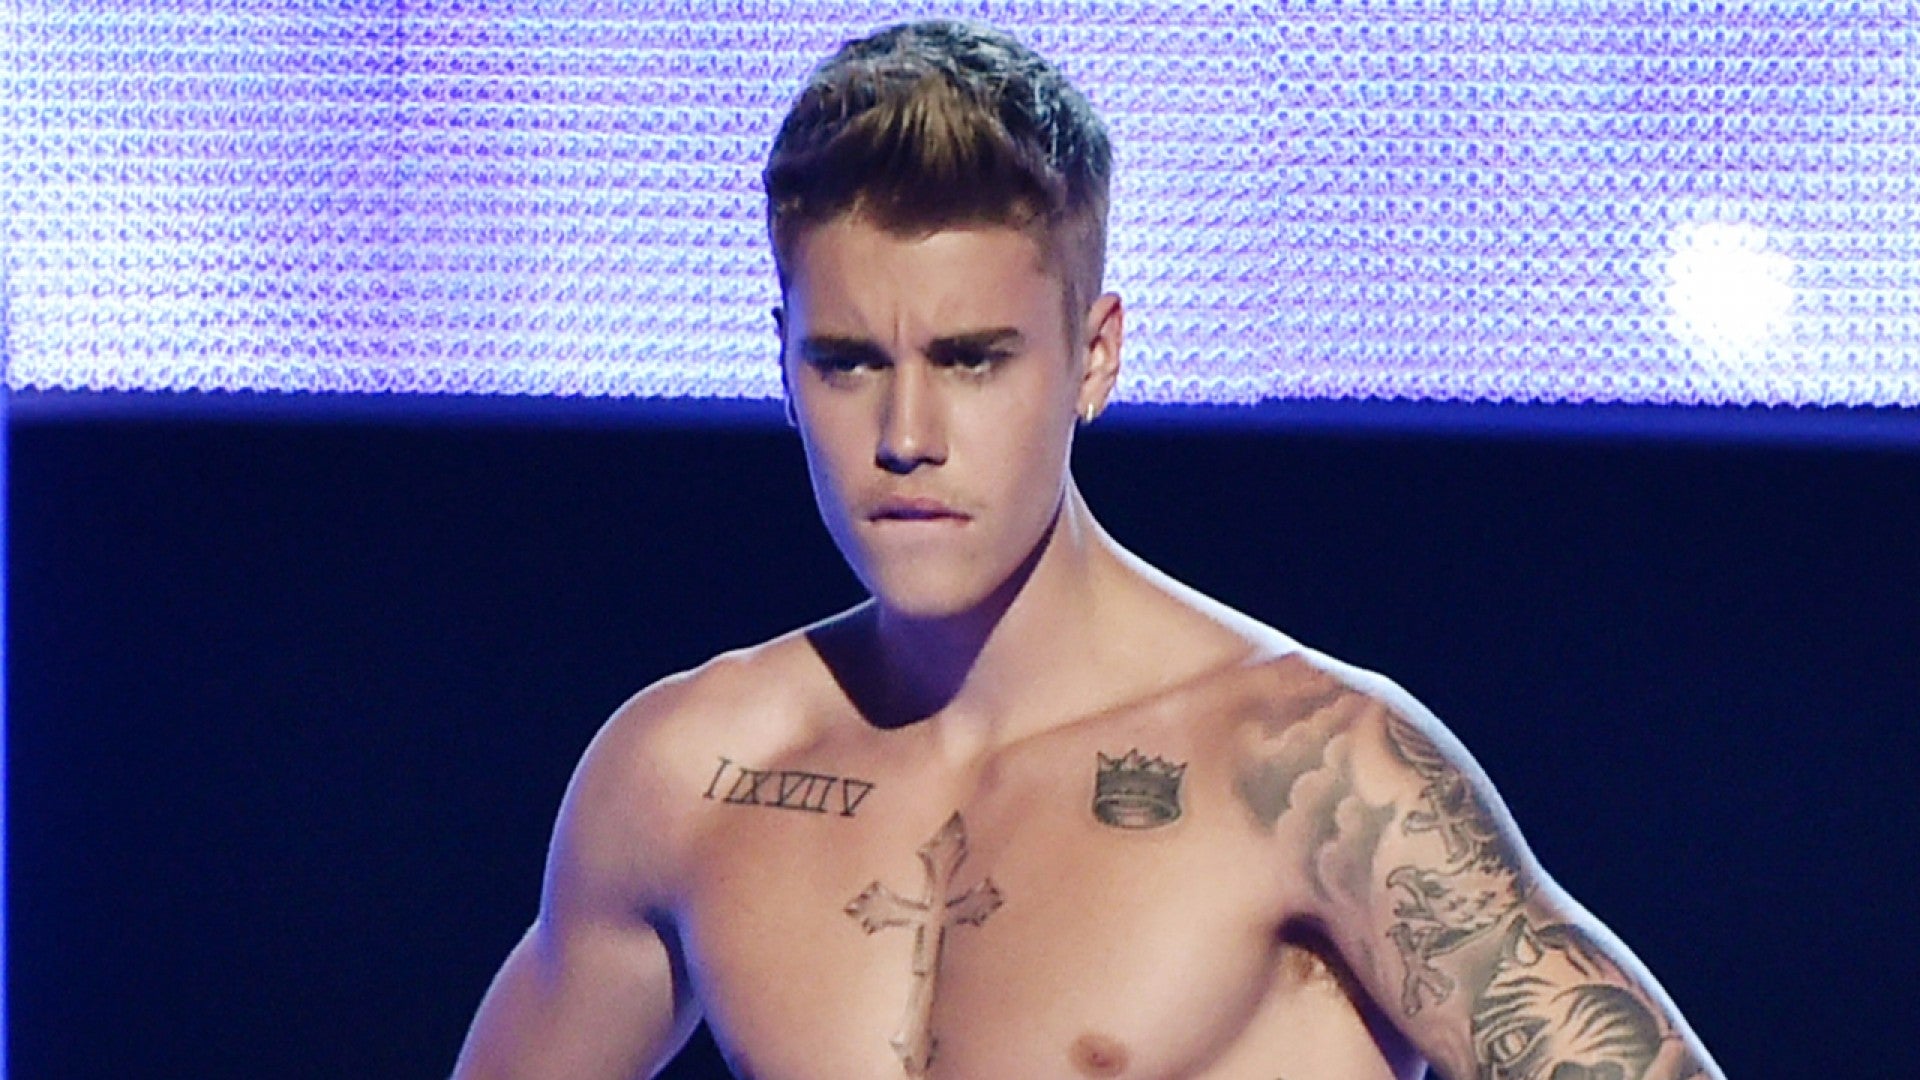 Justin Nude - Justin Bieber's Dad Is 'Proud' of His Son's Package | Entertainment Tonight